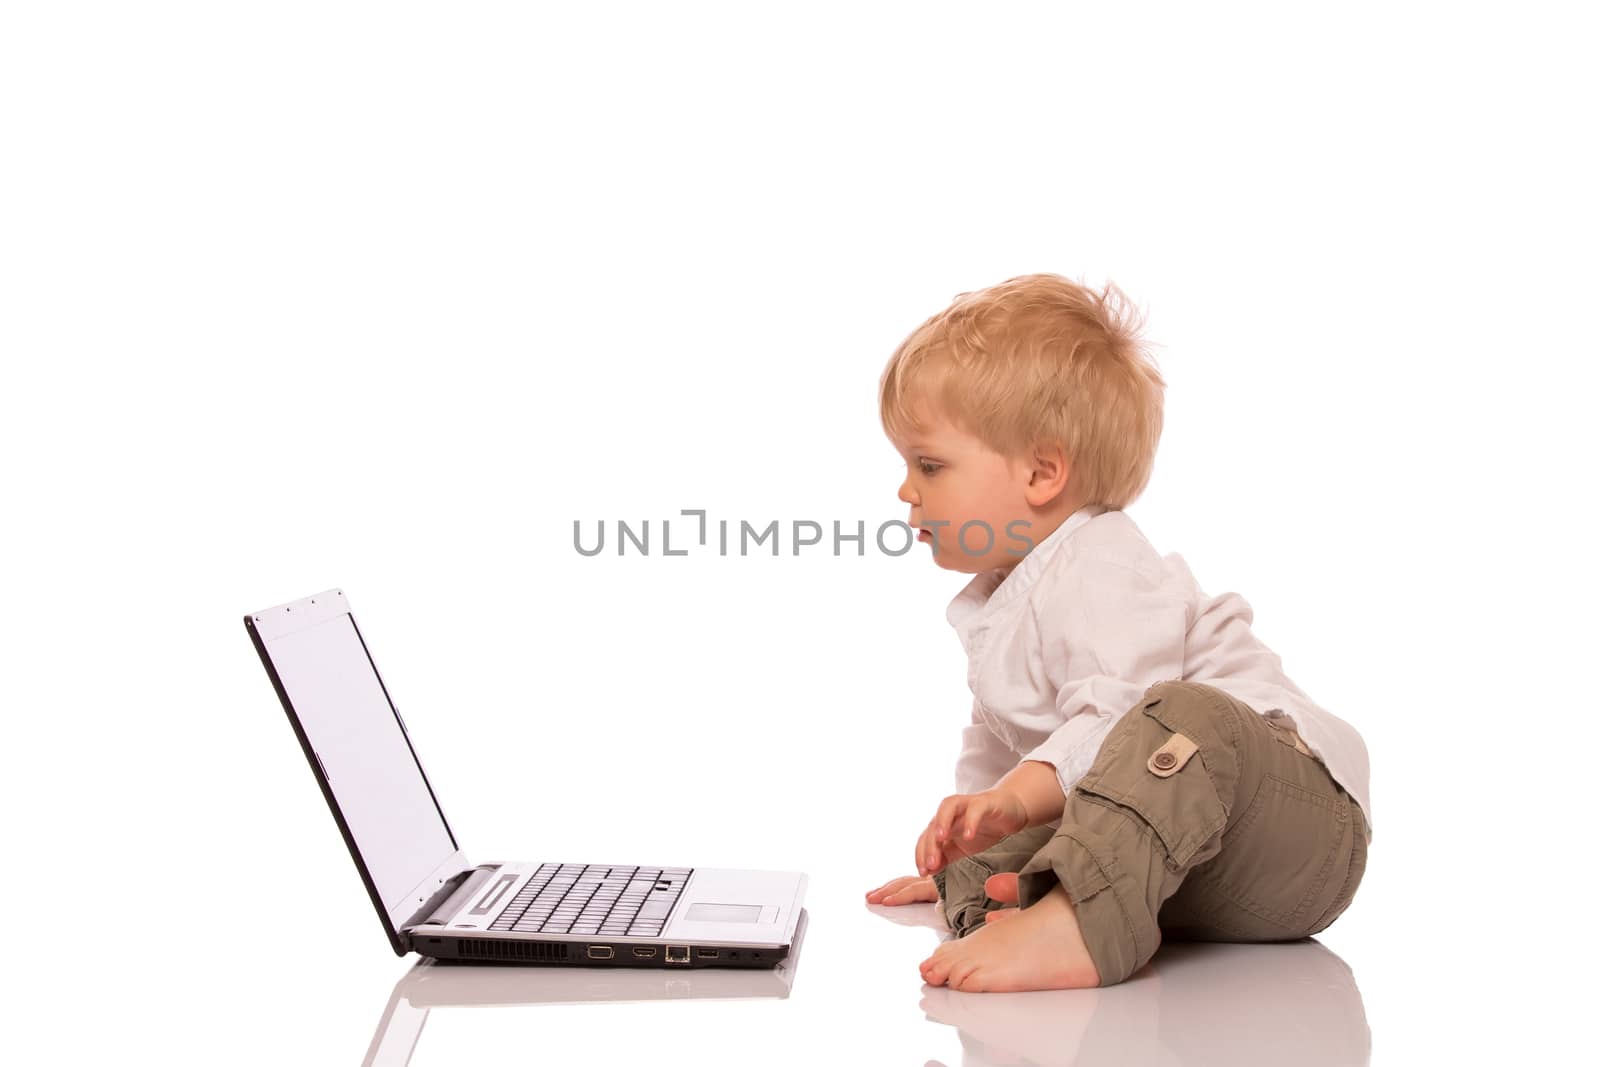 Young boy looking at a laptop on a stool. Isolated on white background